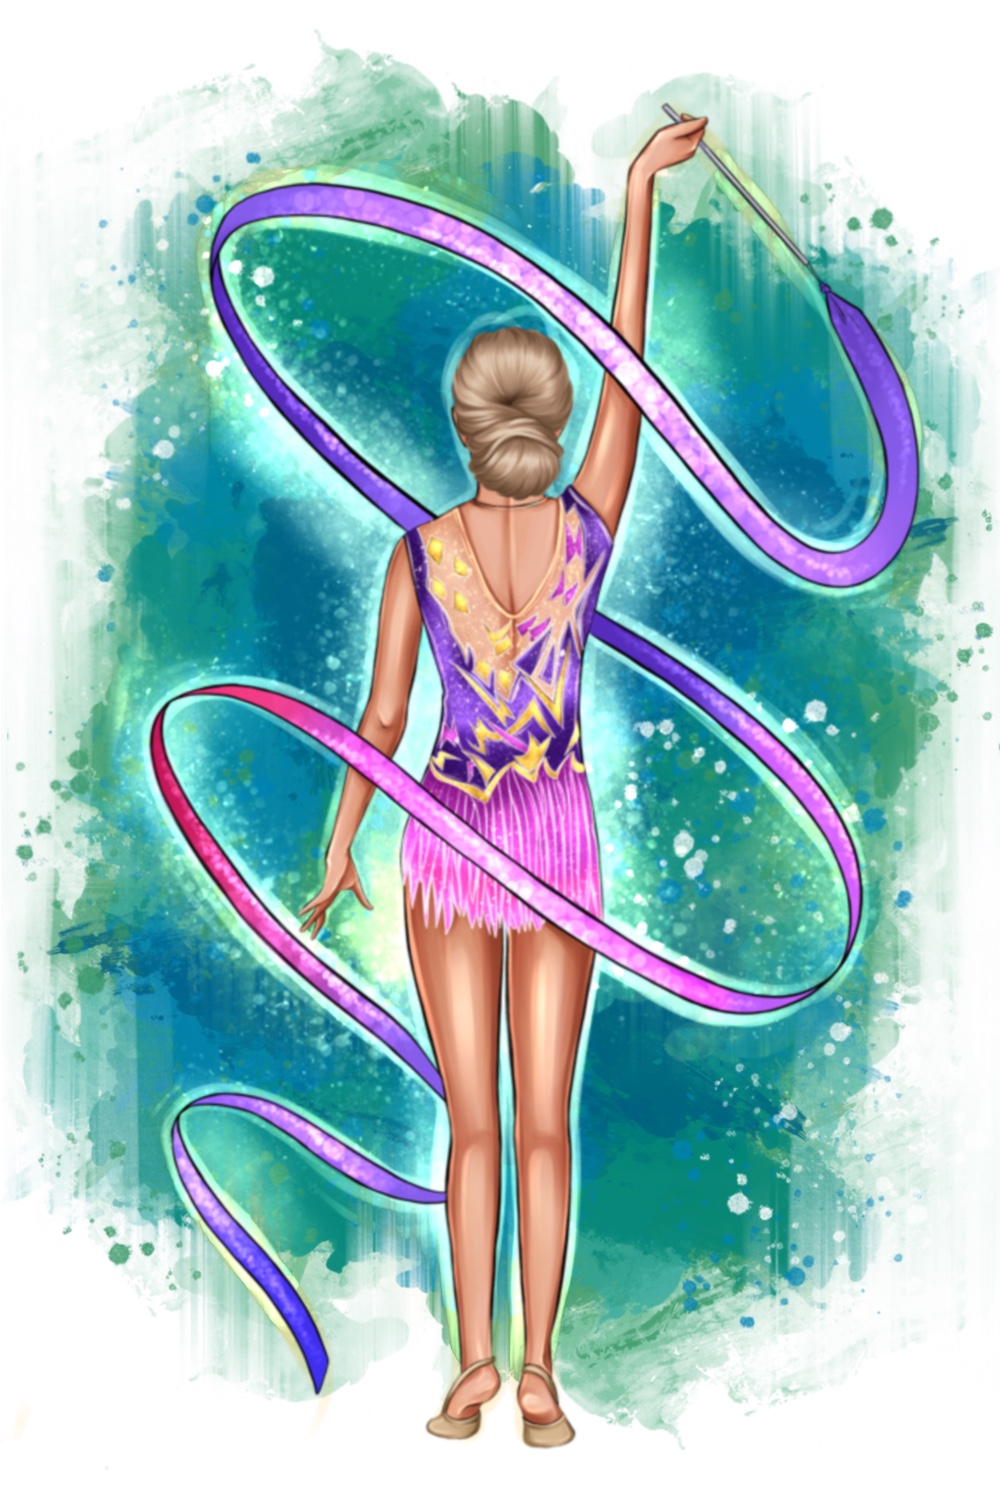 Gymnasts Clipart From The Back Pinterest Image.